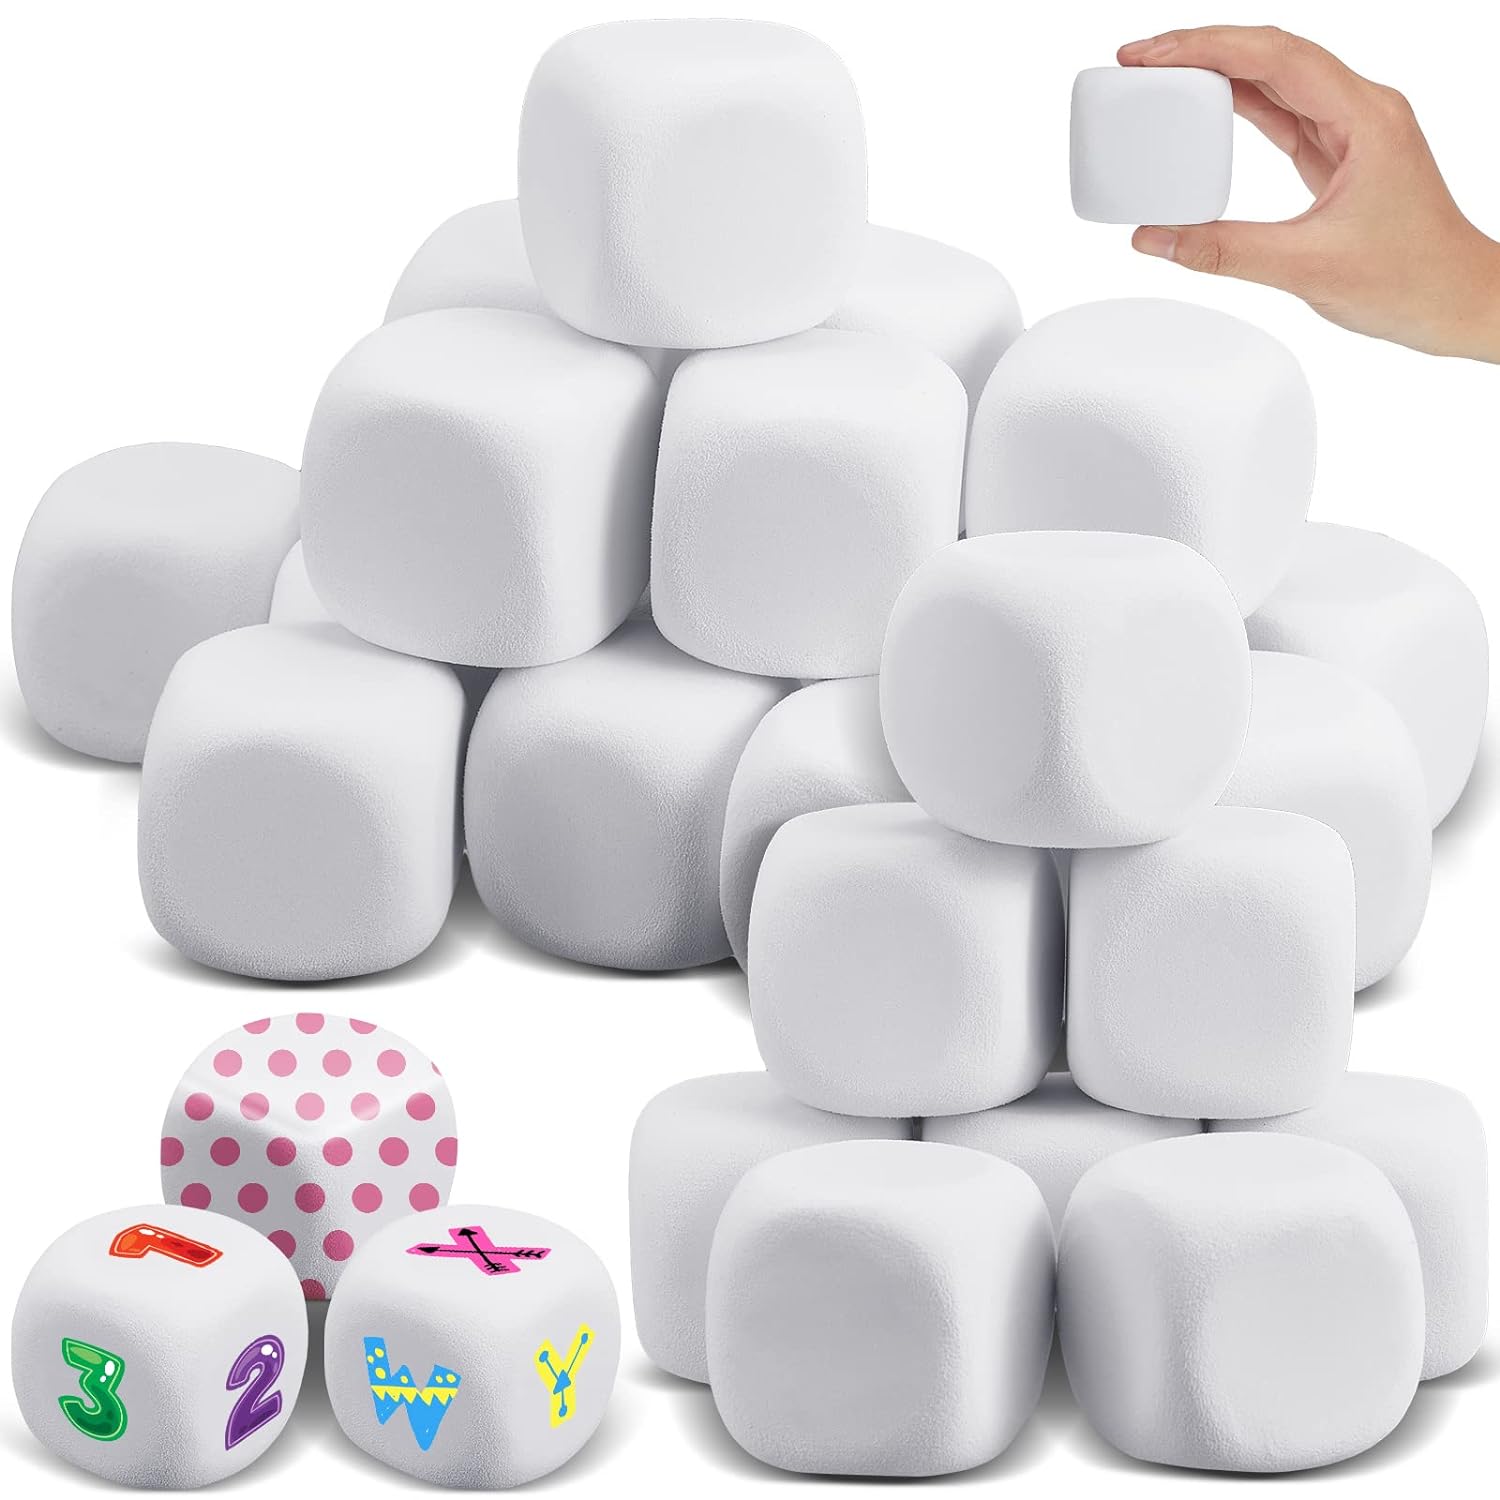 Great Choice Products 50 Pcs White Blank Dice Eva Foam Dice 1.96 Inch Graffiti Foam Blocks For Crafts Building Foam Cubes For Crafting Game Co…